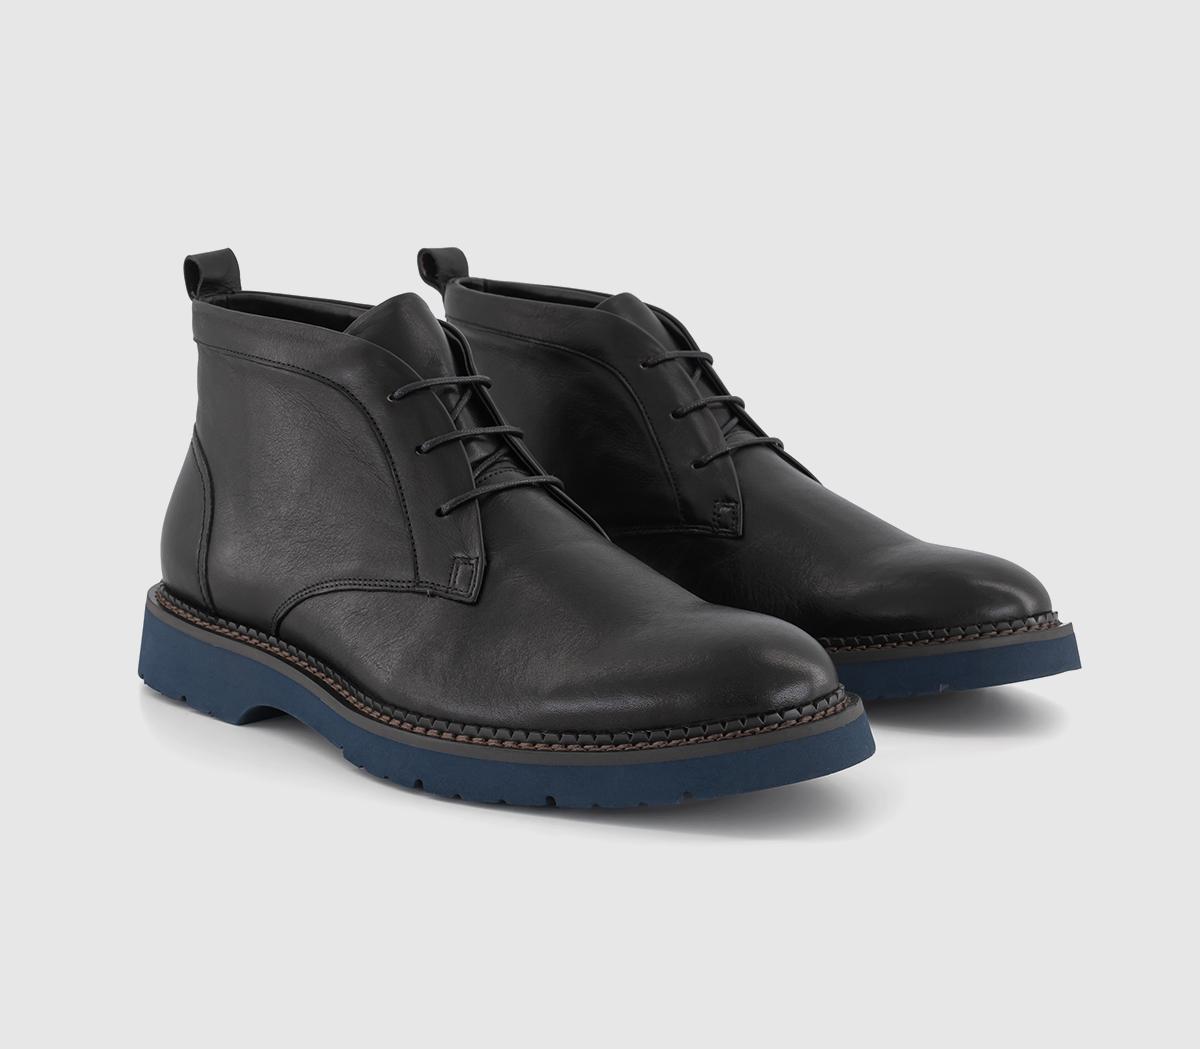 Poste Mens Petersham Contrast Outsole Chukka Boots Black Leather, 10